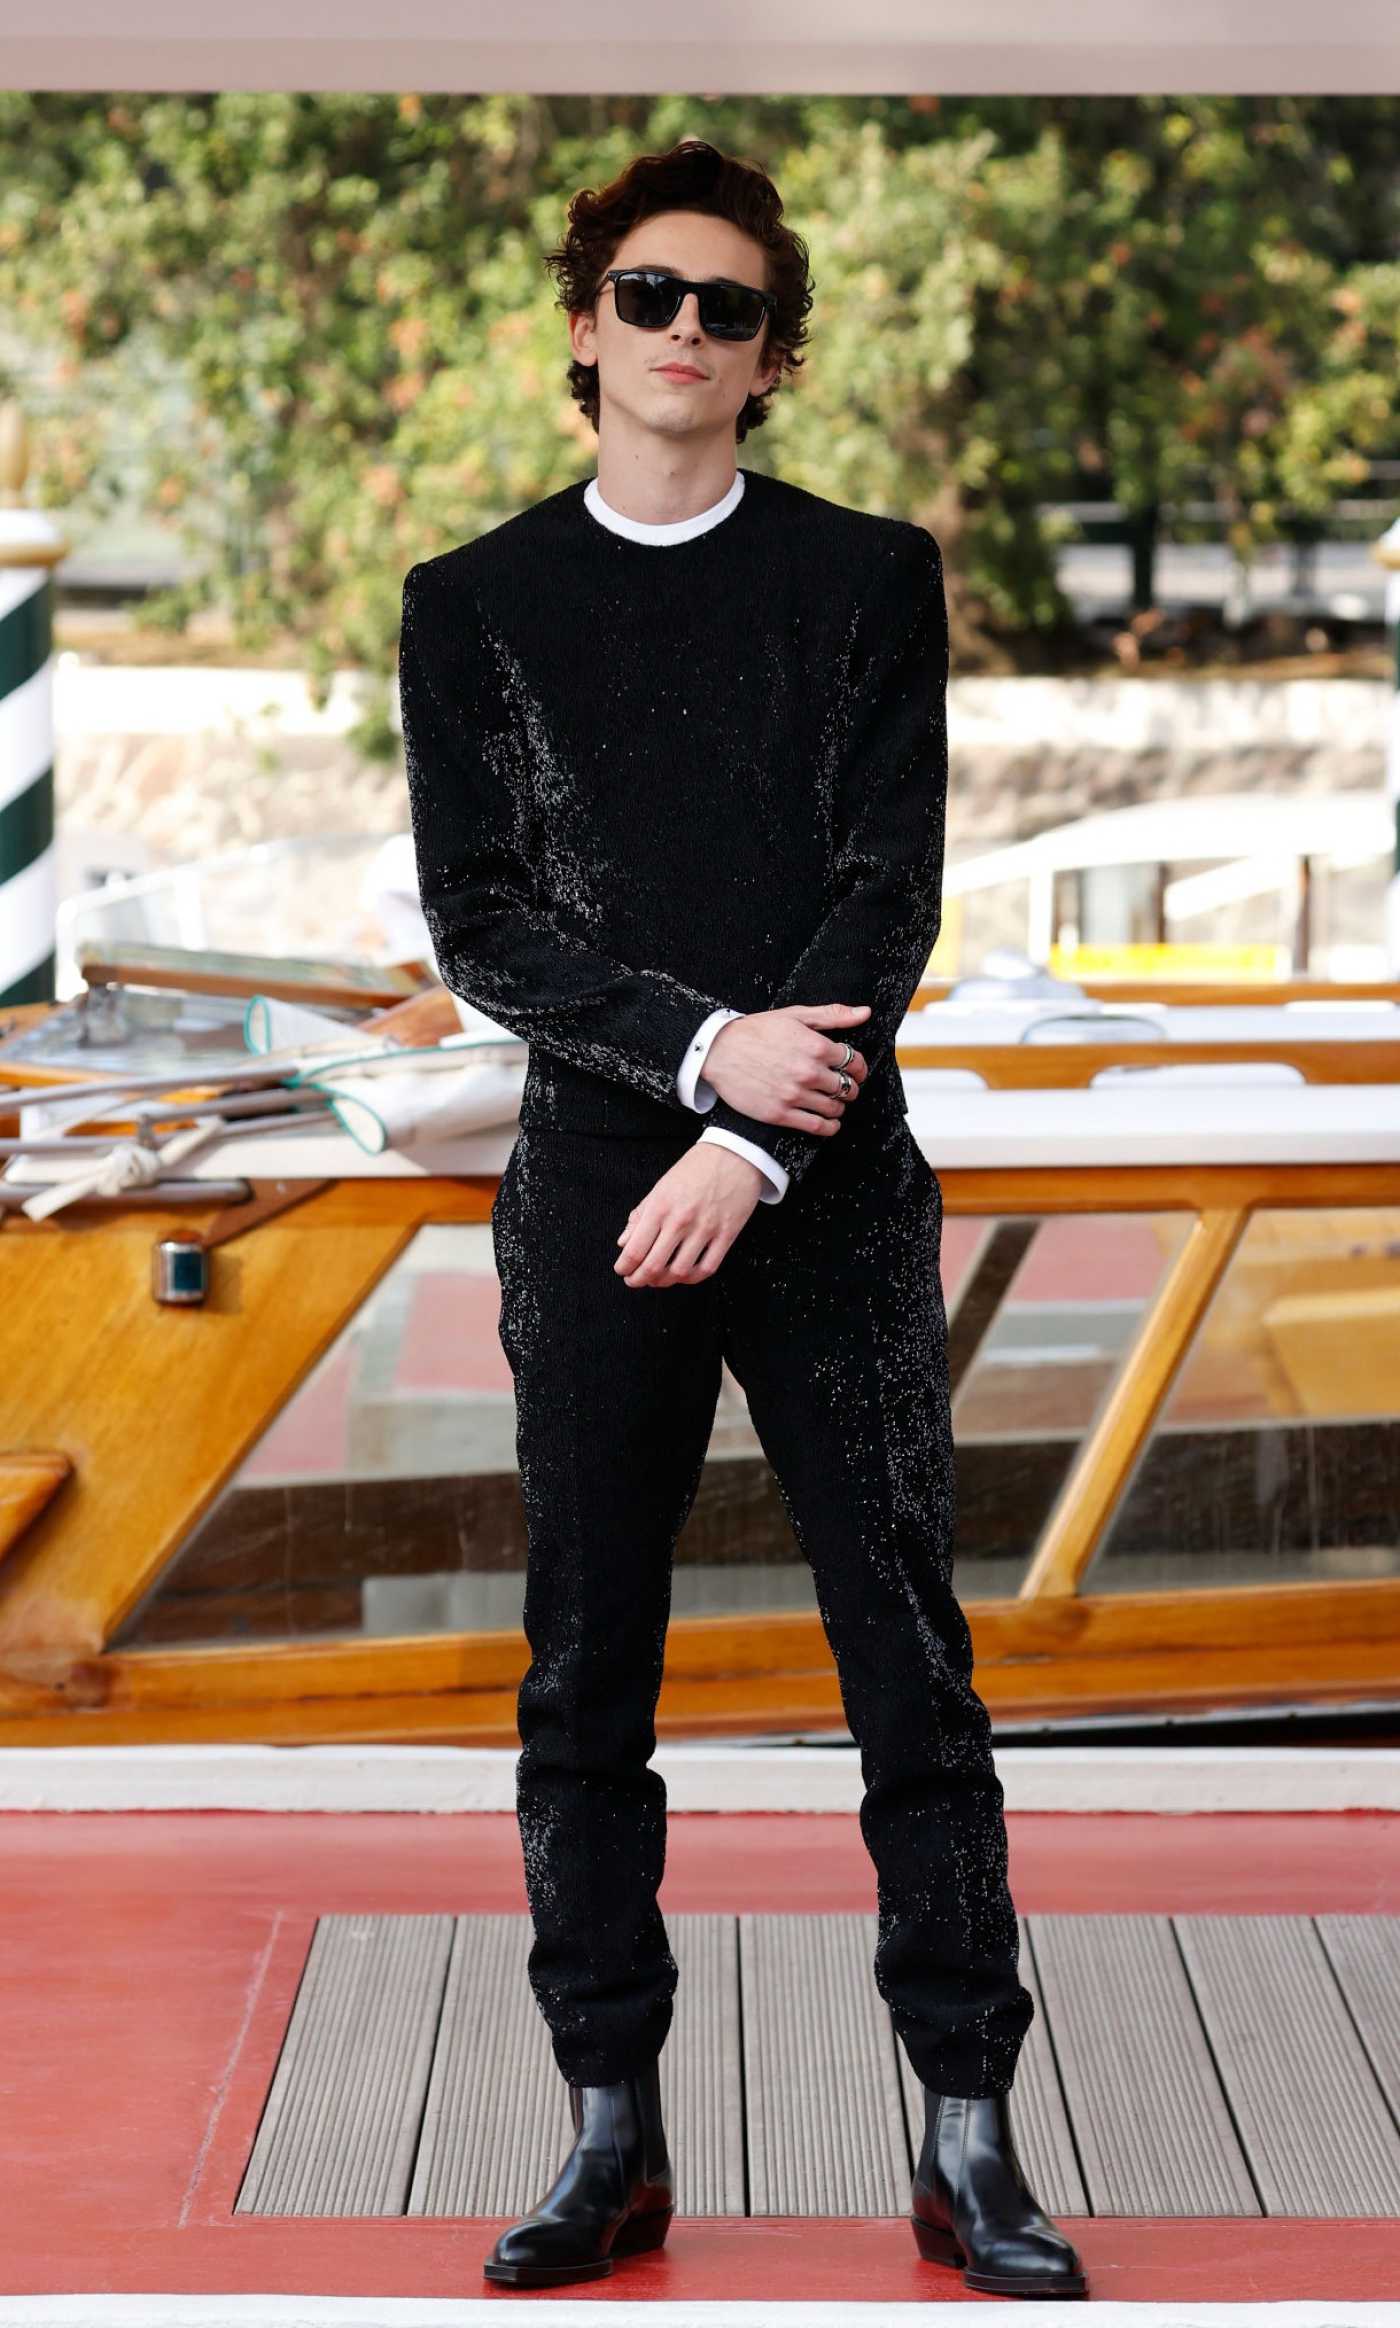 Timothee Chalamet in a Black Outfit Arrives at the 78th Venice International Film Festival in Venice 09/03/2021